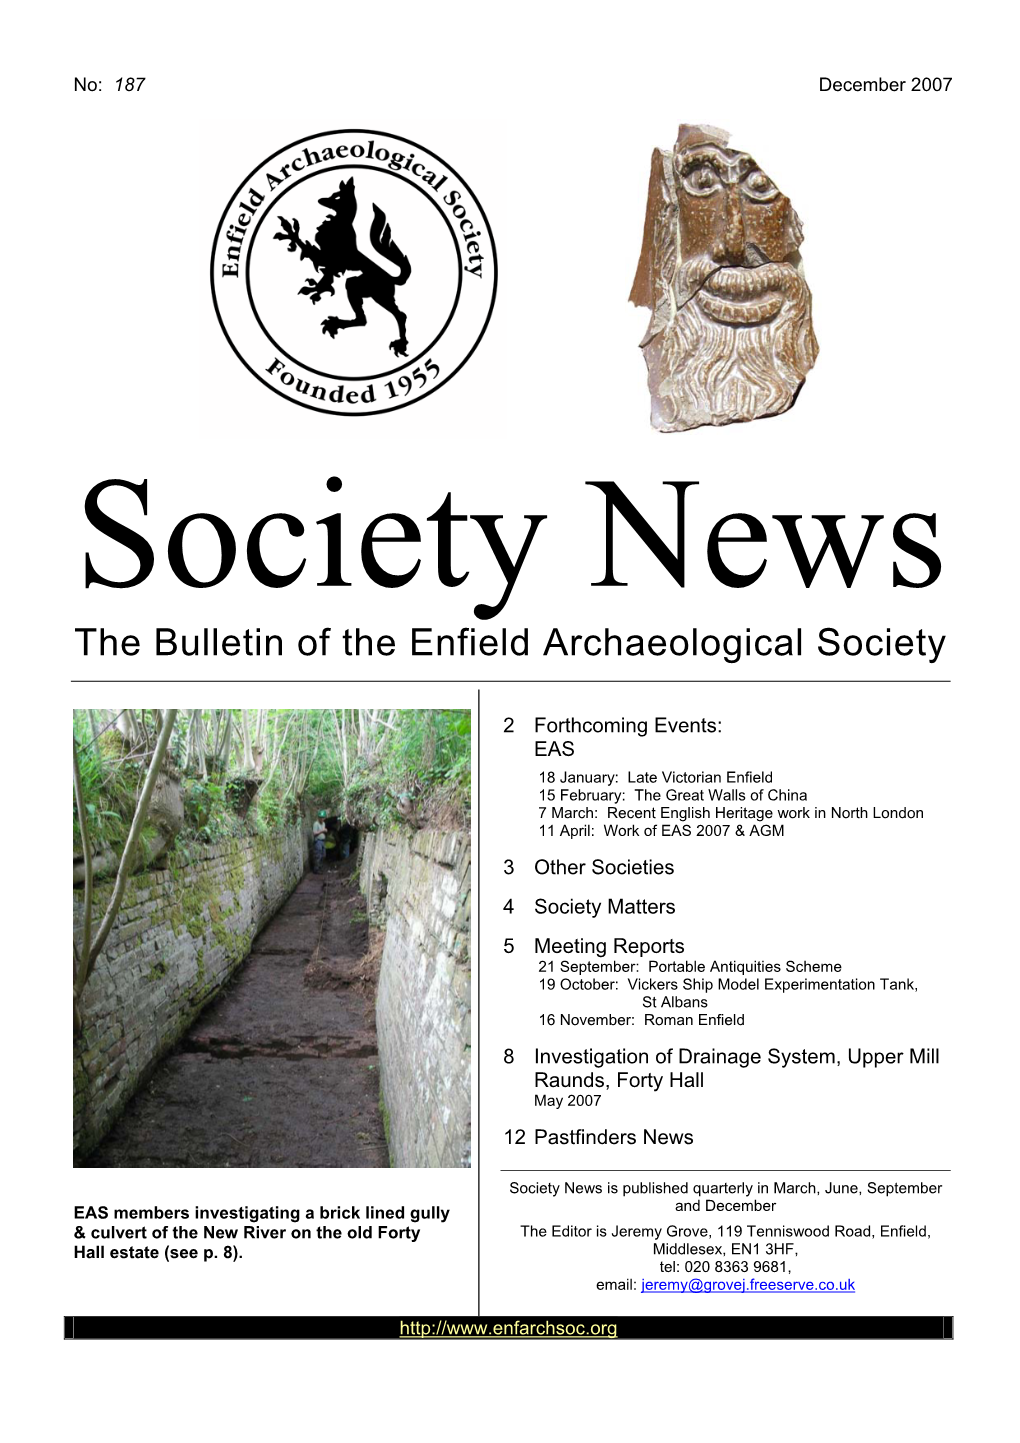 The Bulletin of the Enfield Archaeological Society